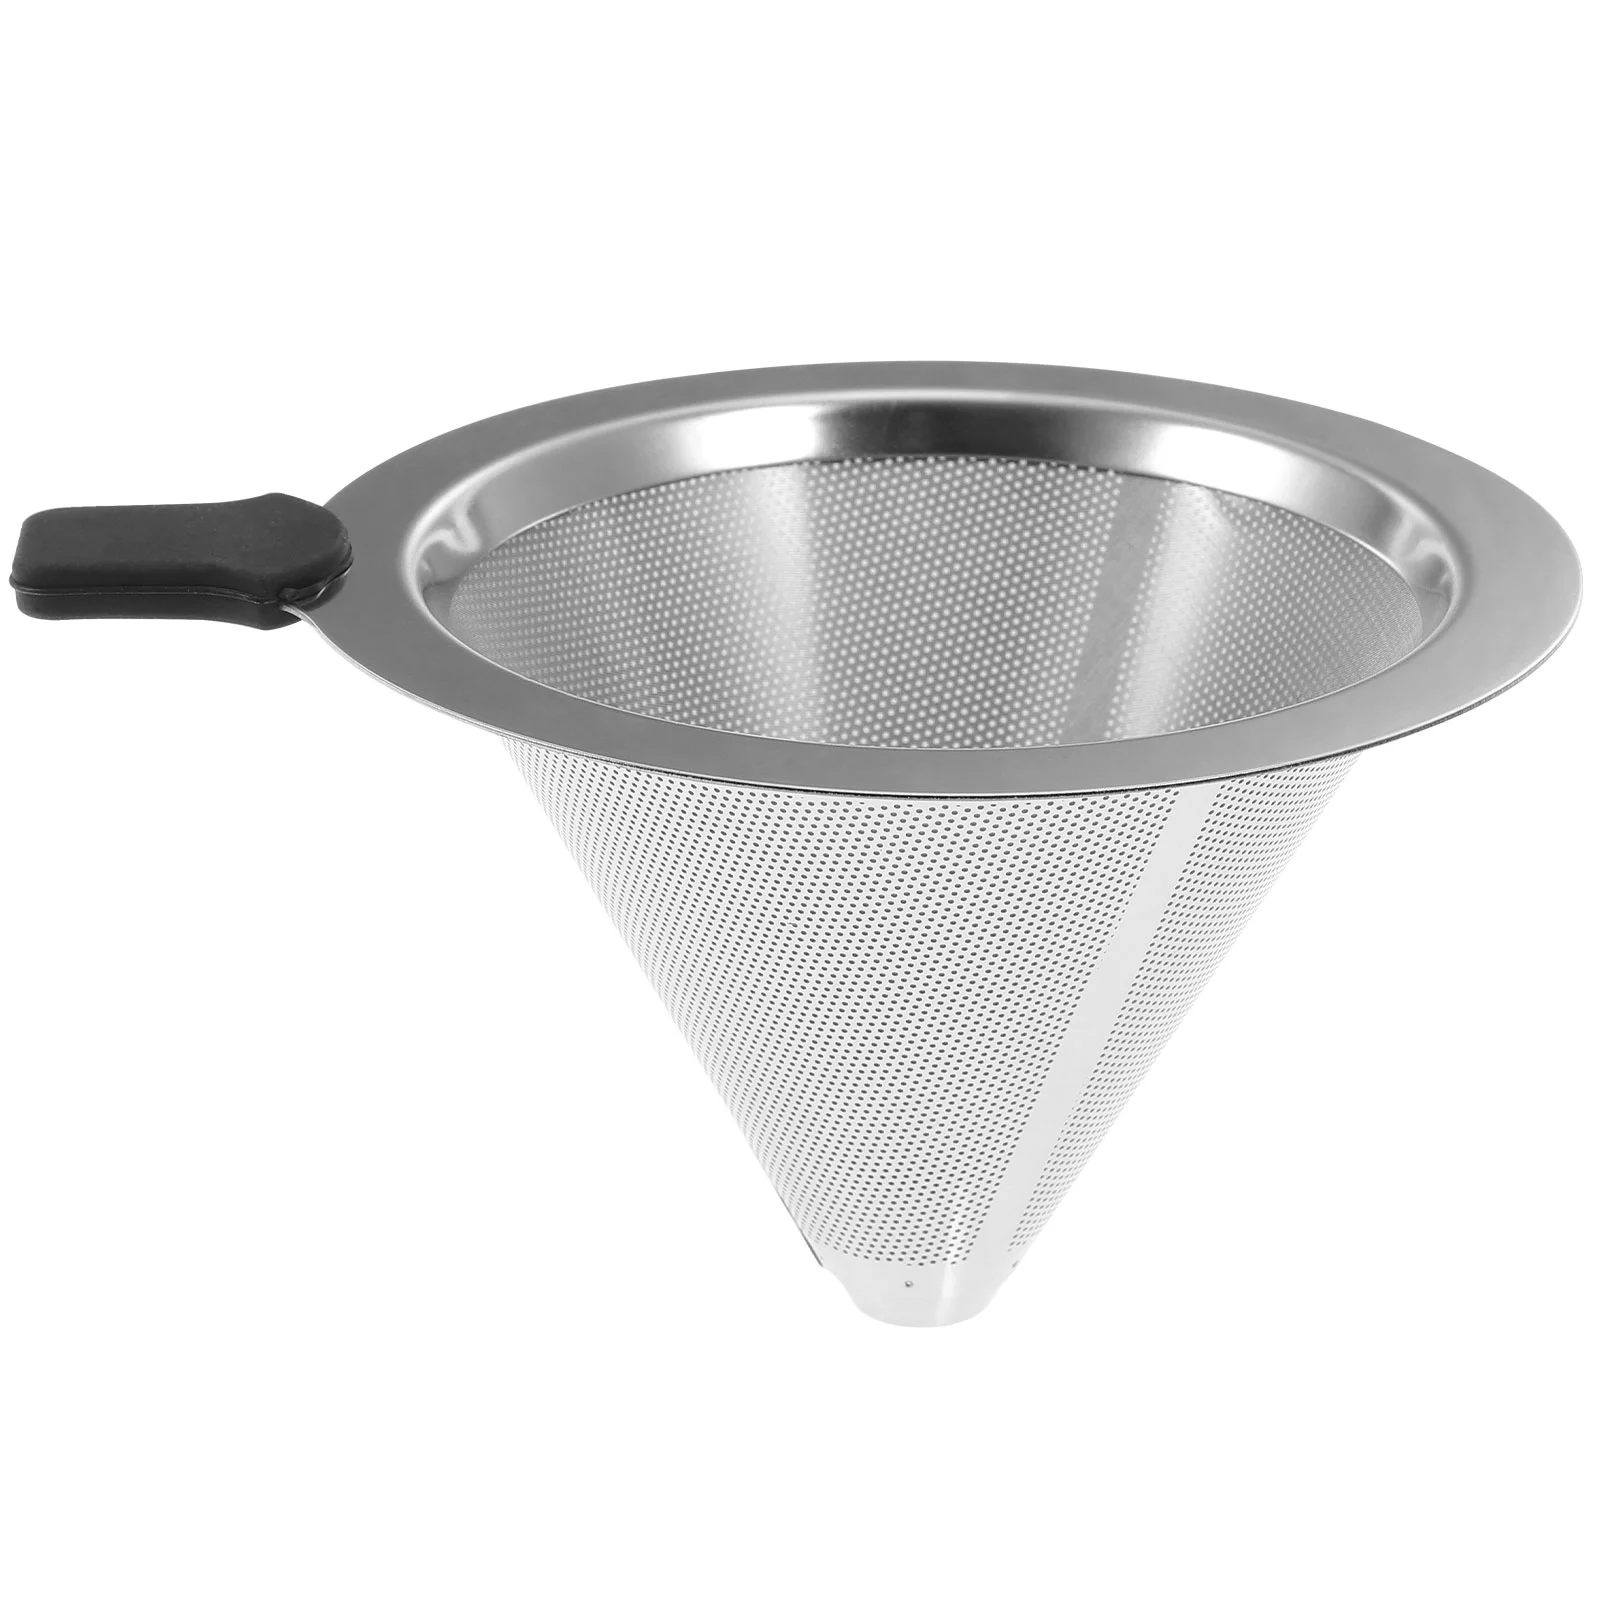 

Coffee Filter Slow Drip Over Dripper Pour Cone Strainer Funnel Stainless Steel Paperless Maker Clever Brew Reusable